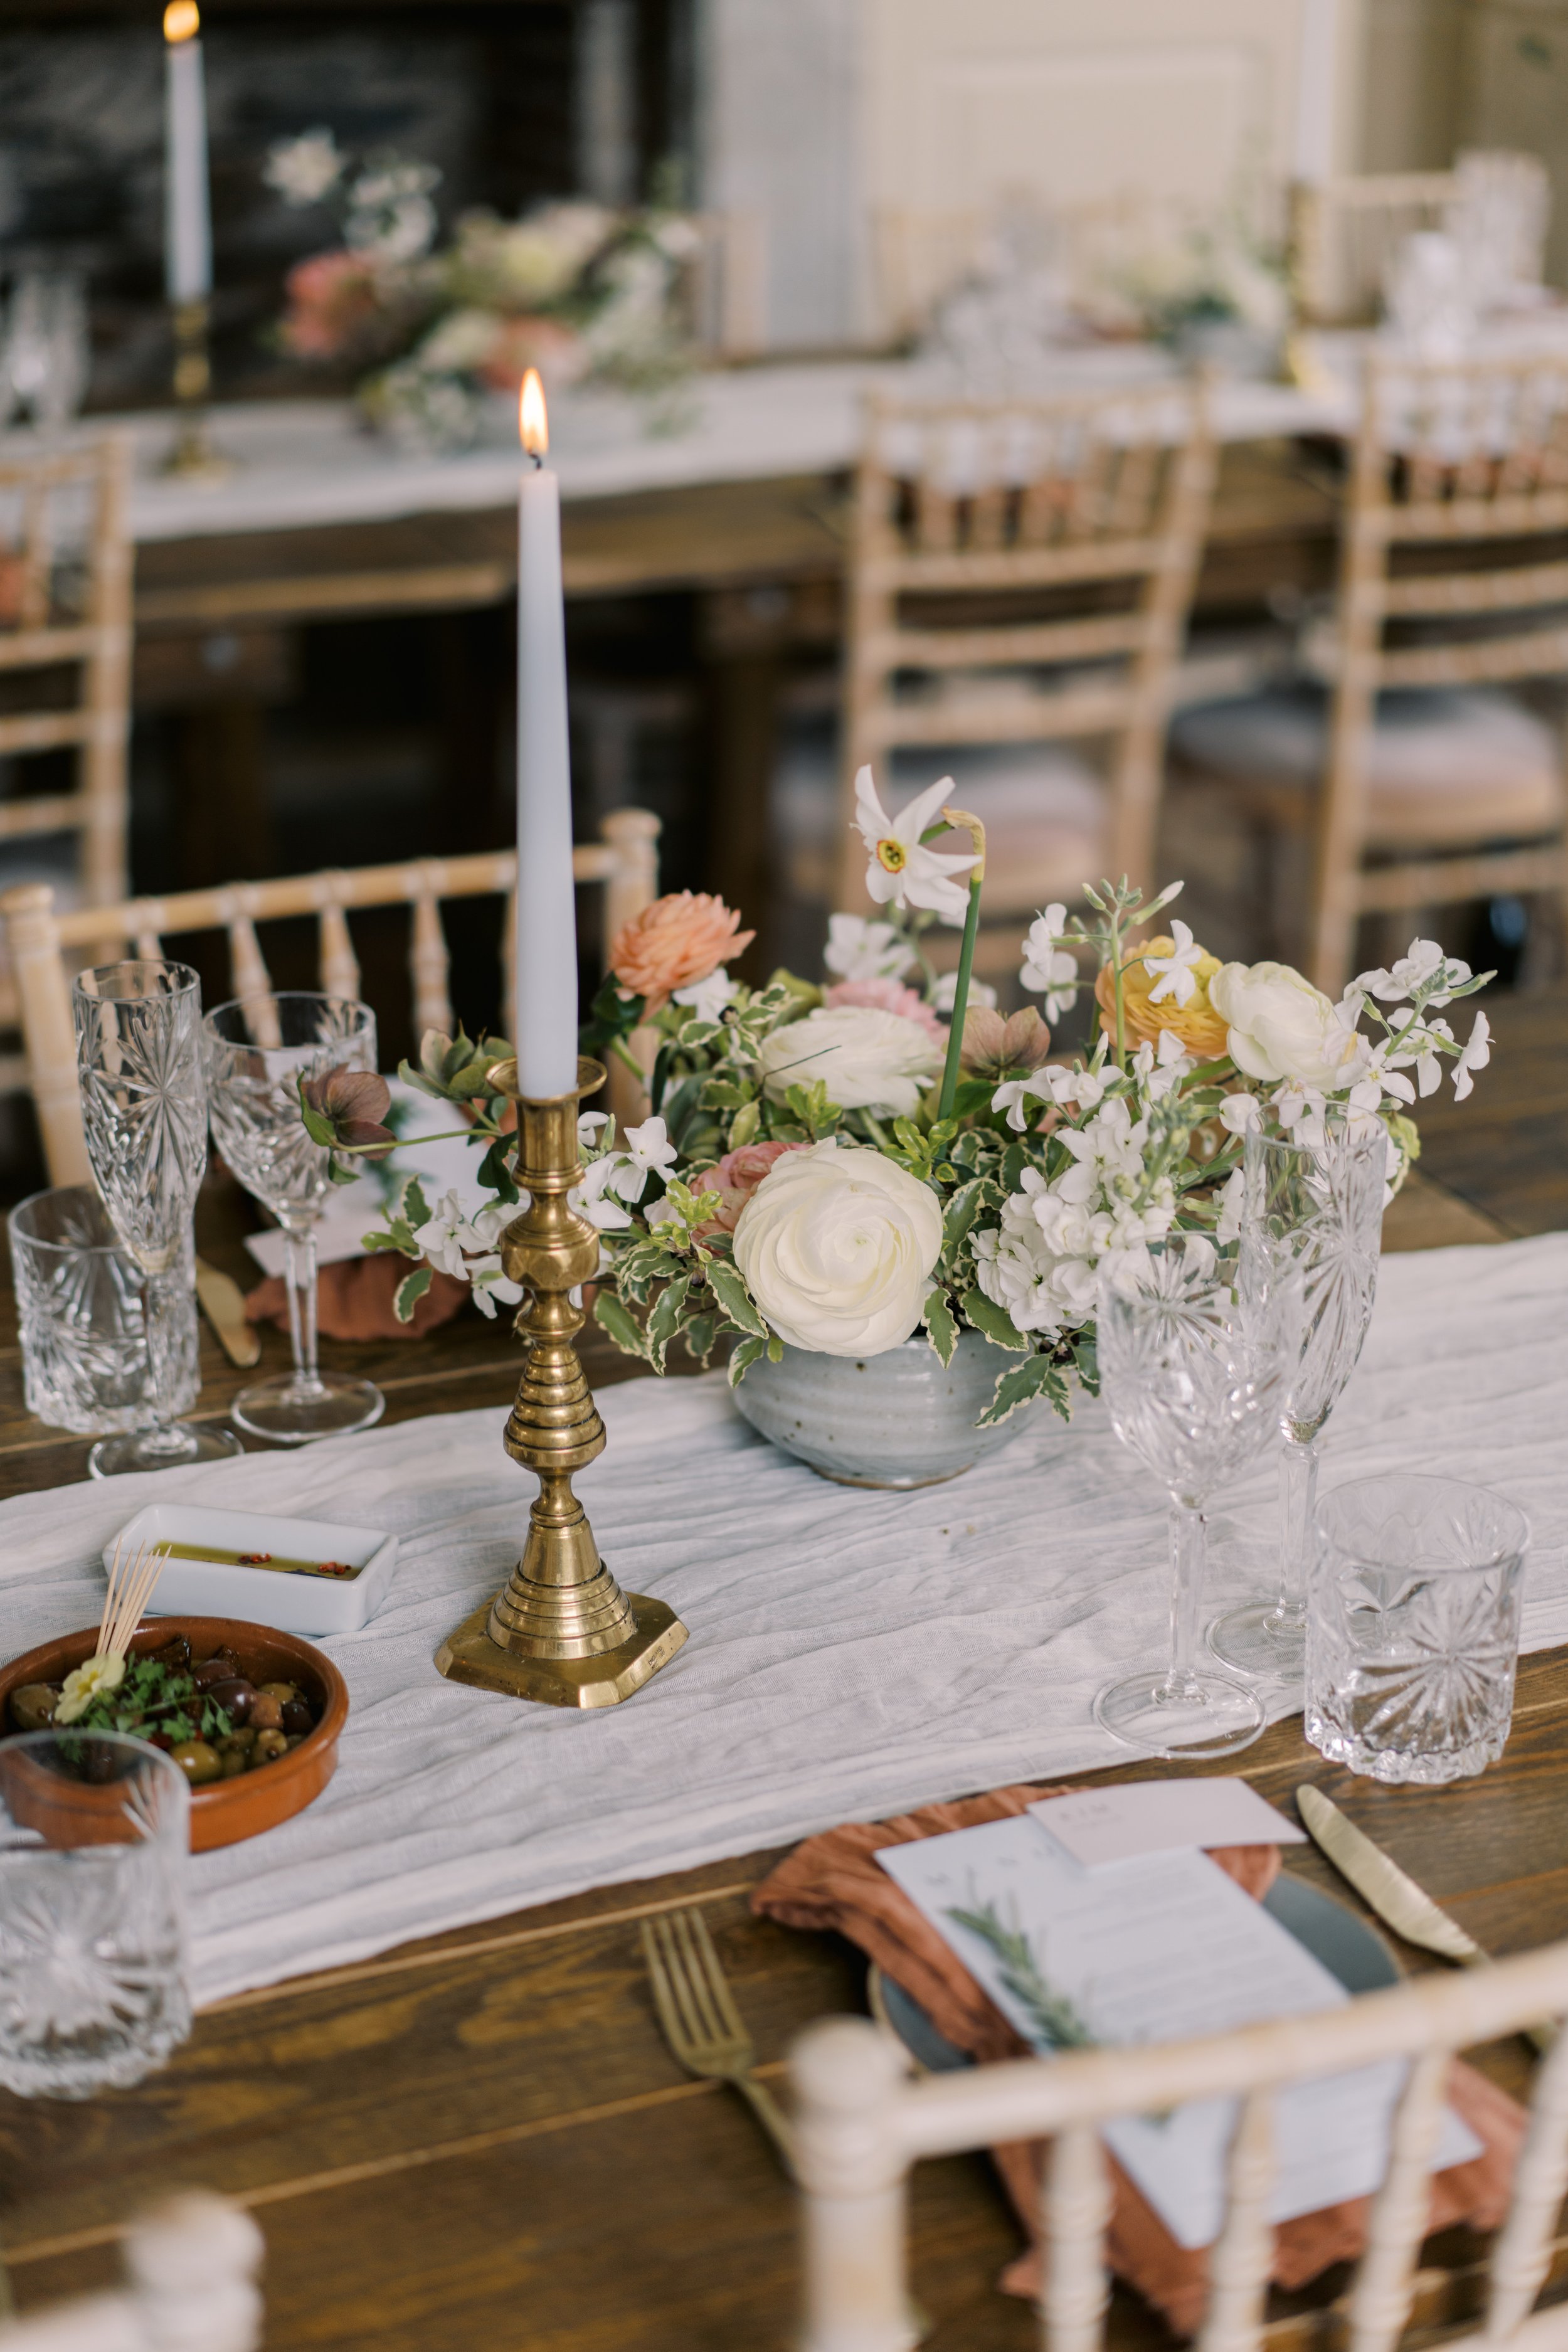 Spring table styling with seasonal flowers